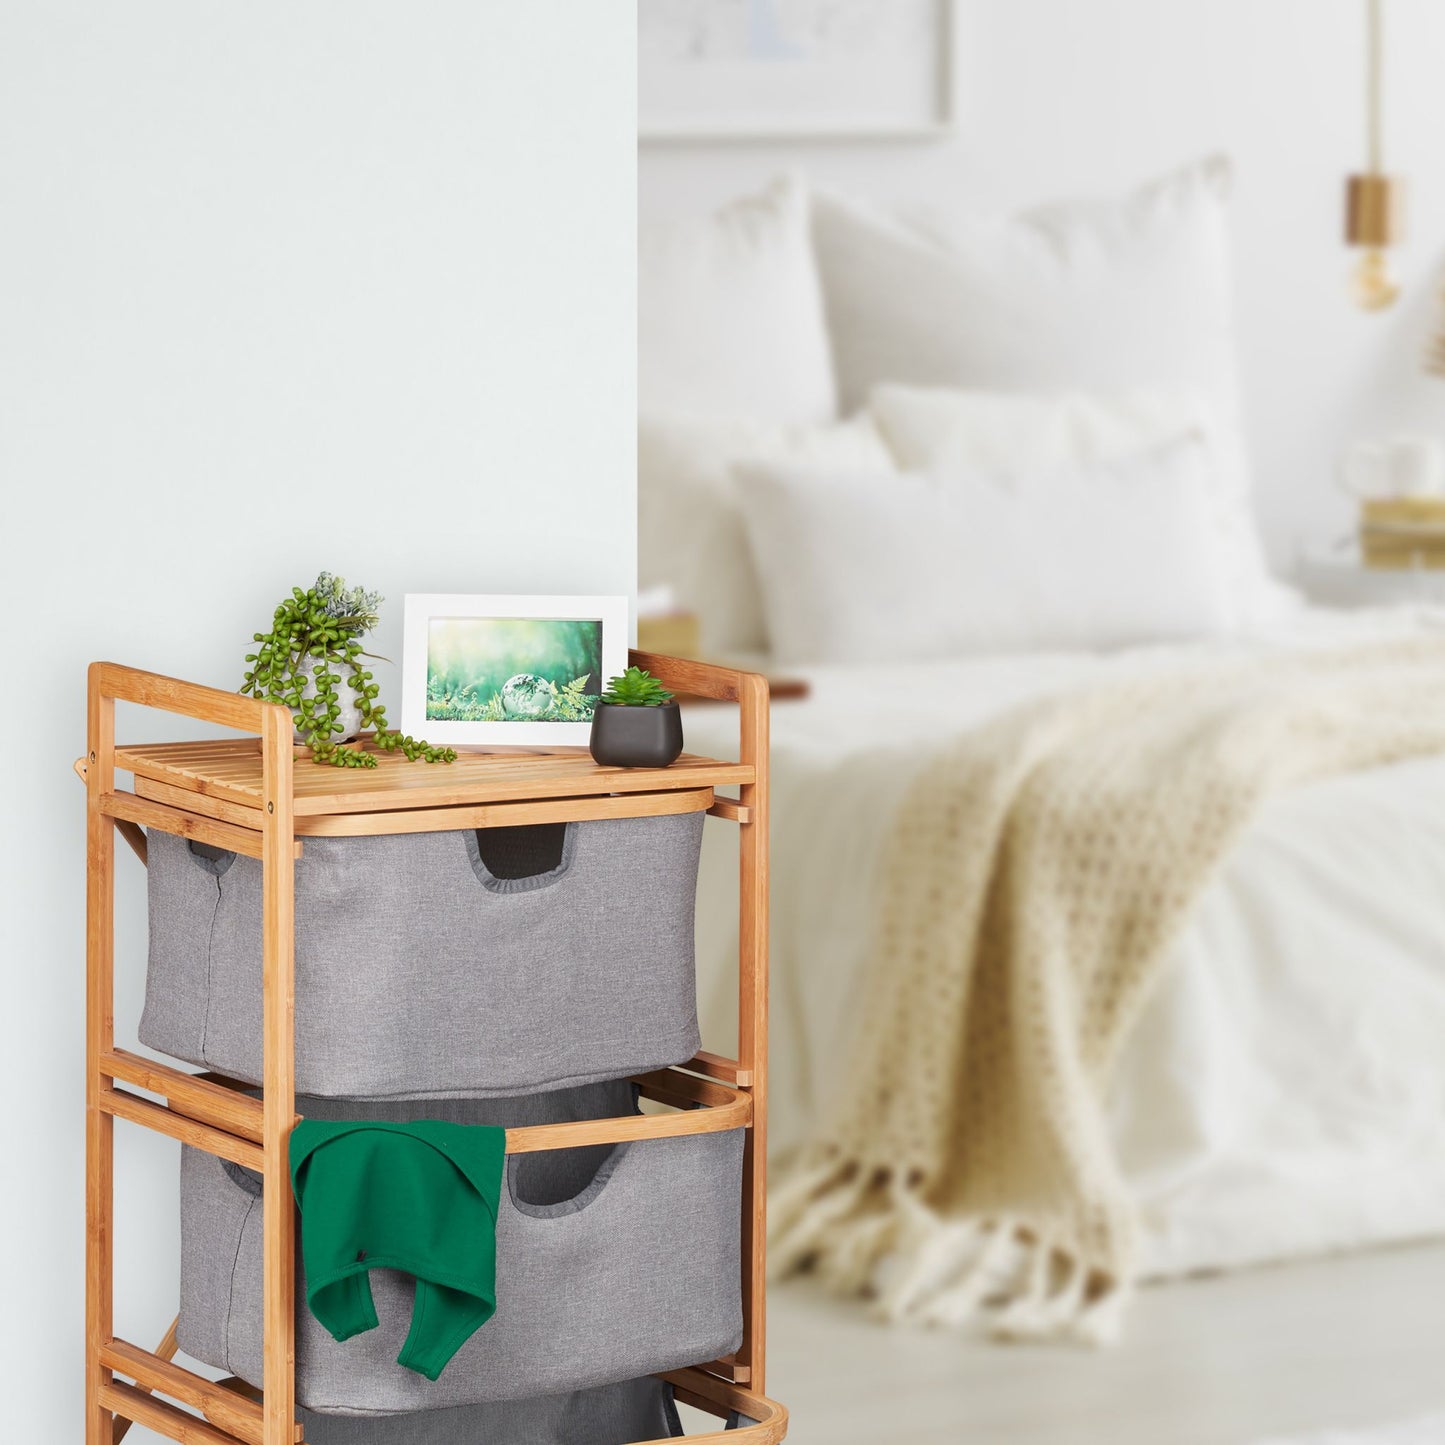 RelaxDays Bathroom Storage Unit With 3 Drawers Bamboo Bathrooms